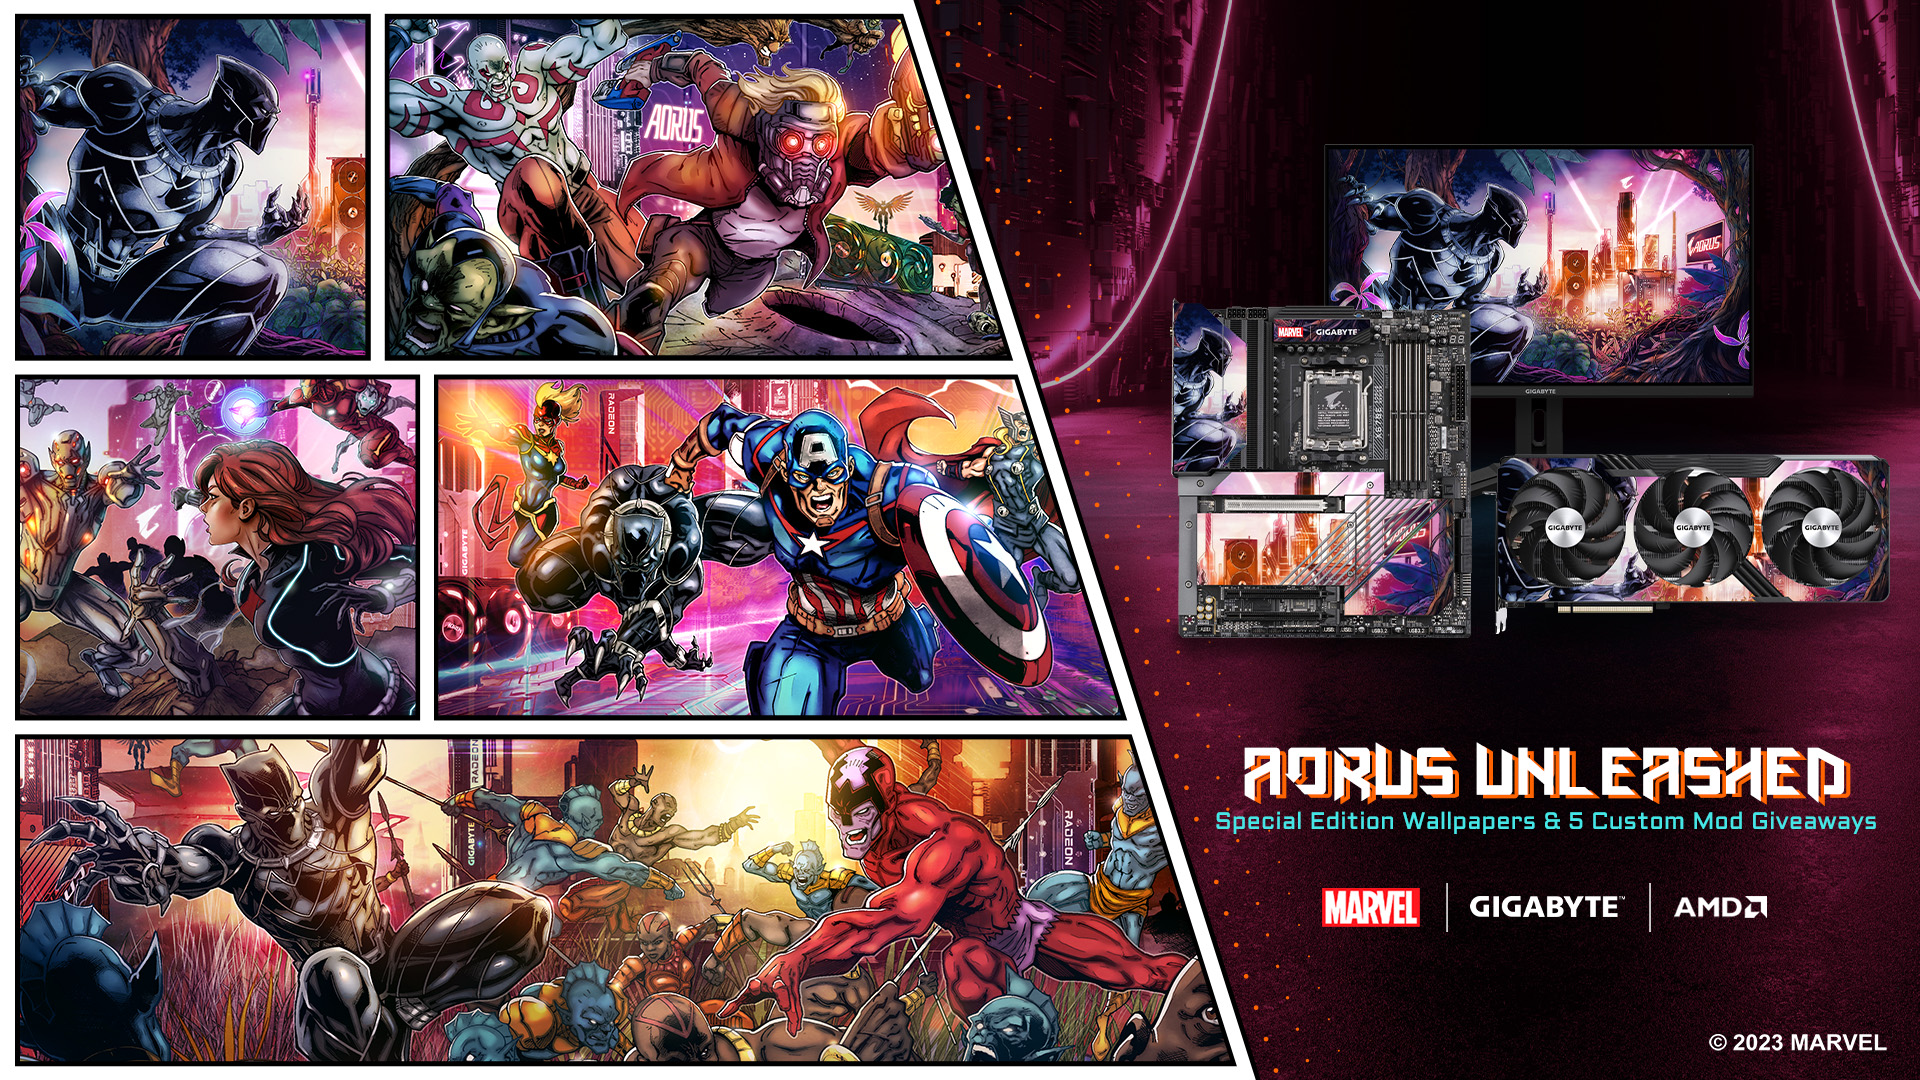 AORUS Unleashed: GIGABYTE AORUS Collaborates with AMD and Marvel on an Exclusive Wallpaper & Custom Mod Giveaway